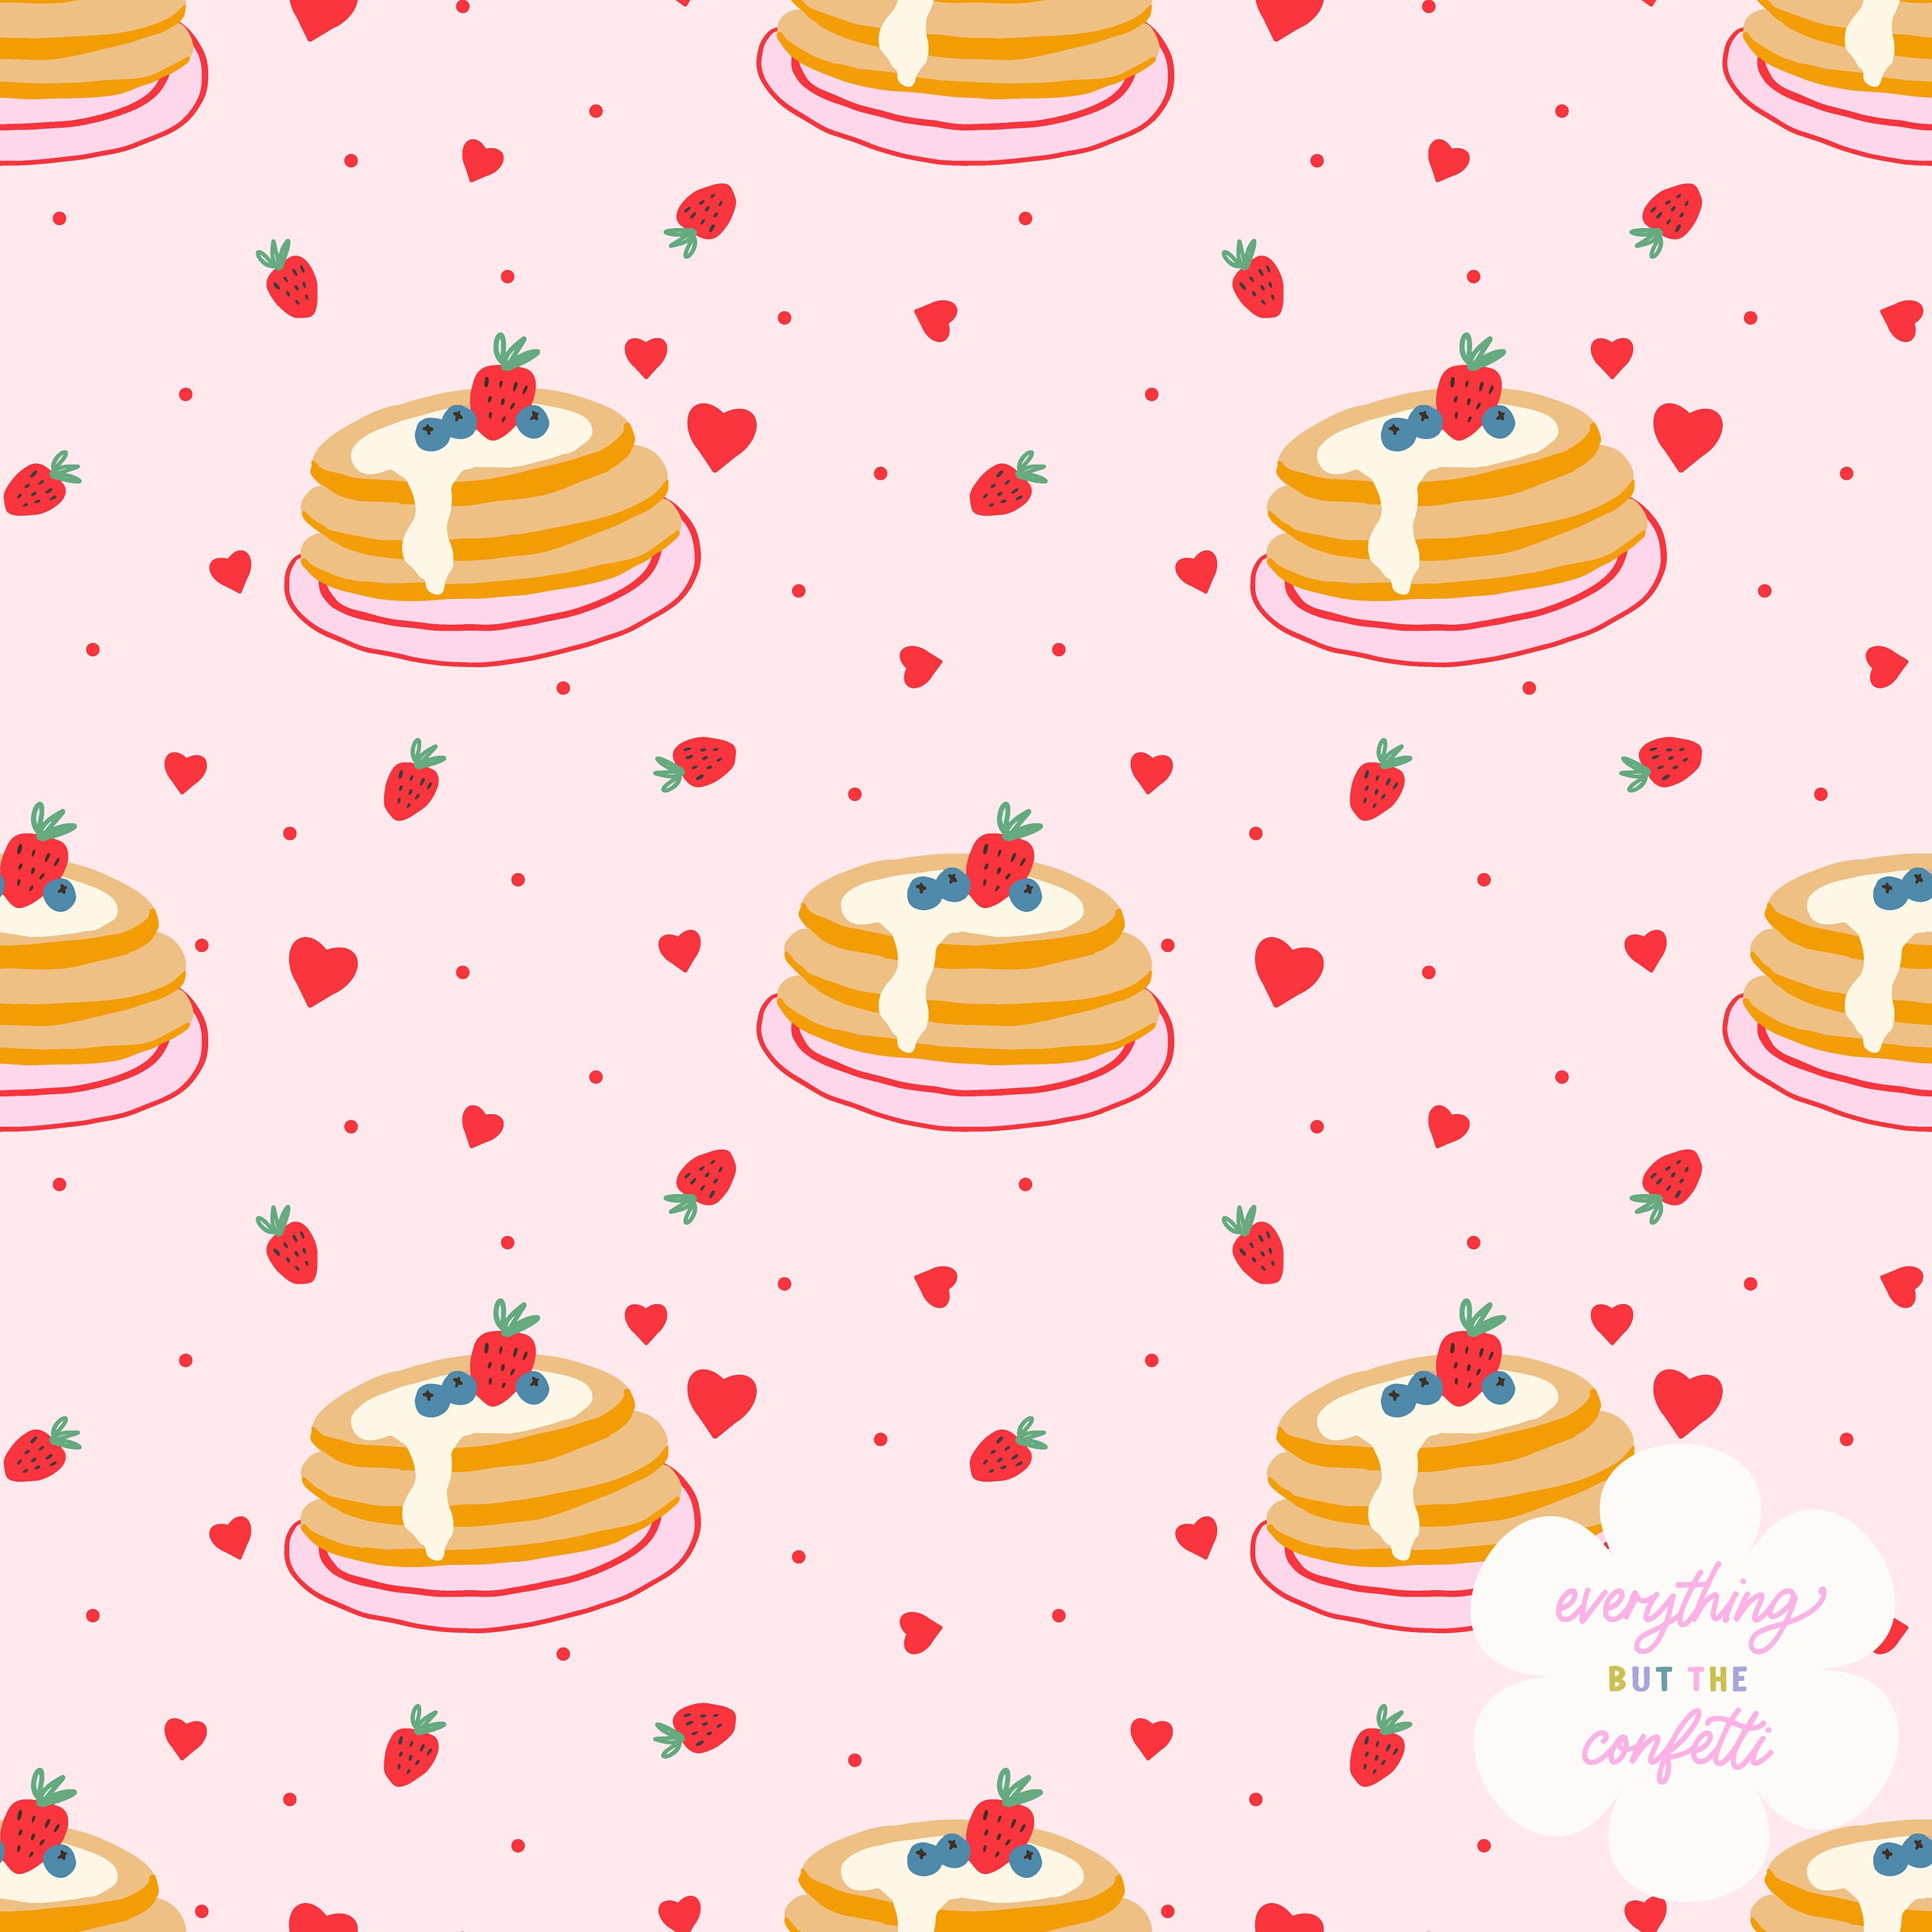 Valentine's Day Seamless Pattern, Cute Valentines Repeat Pattern